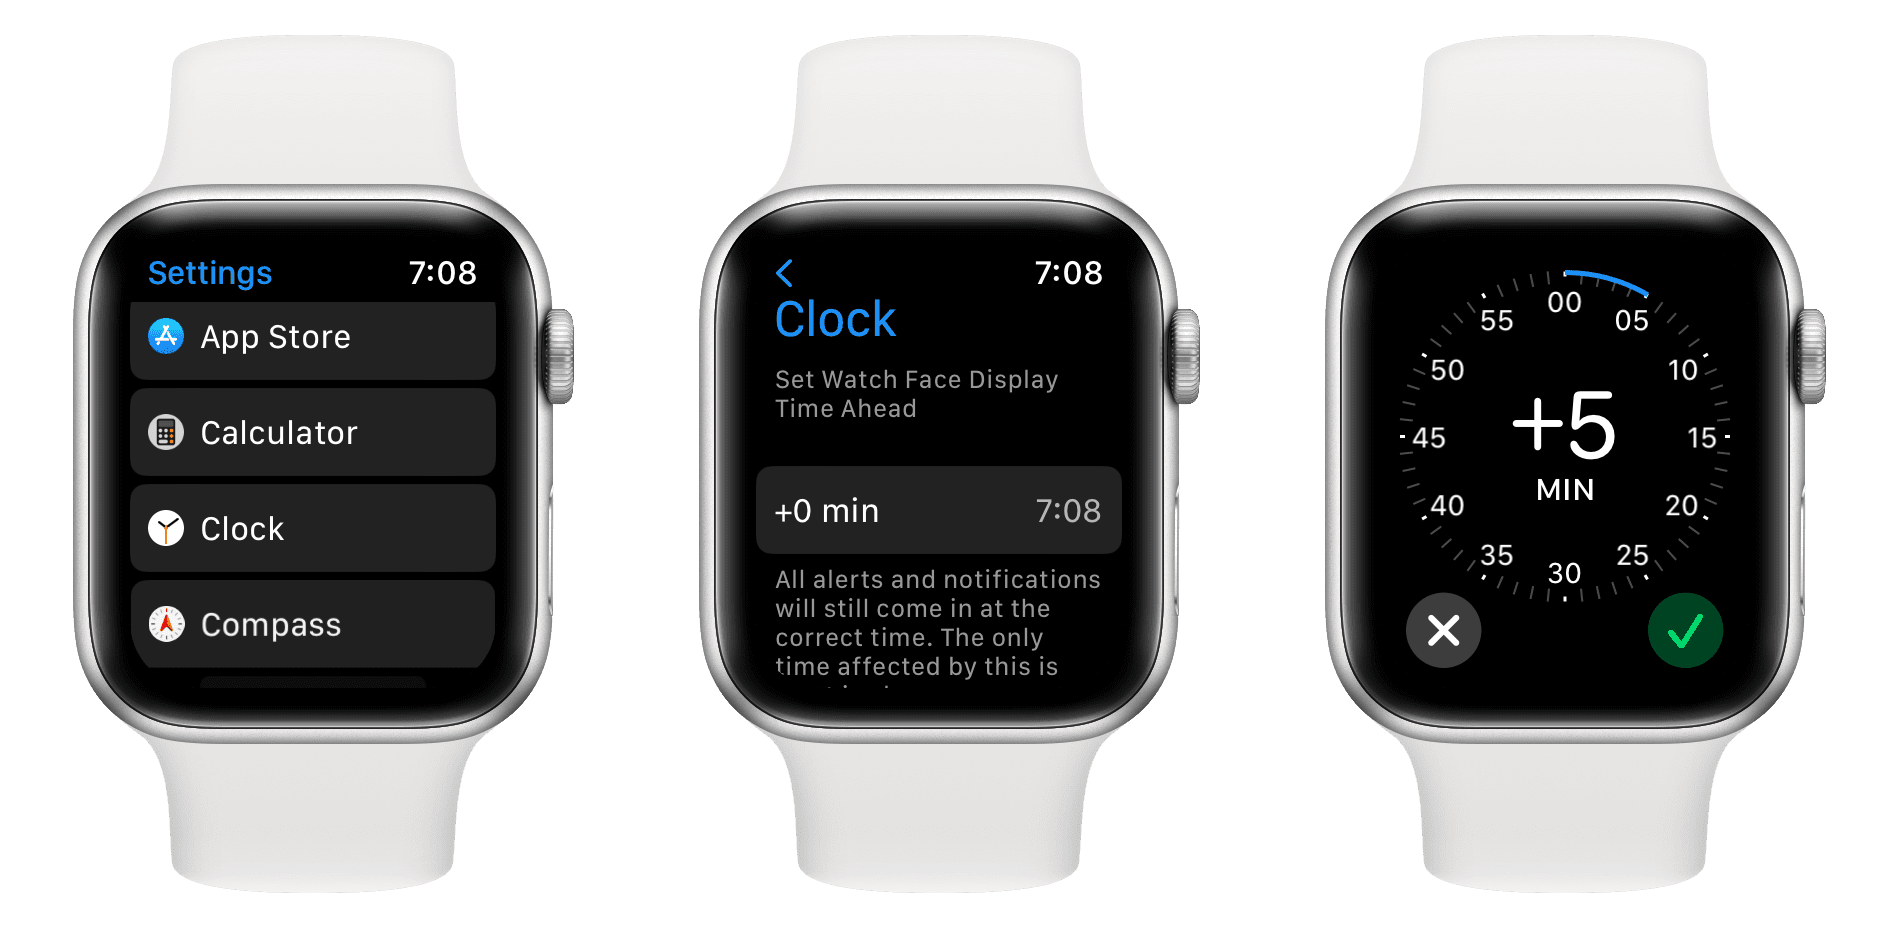 Set watch face display time ahead on Apple Watch by five minutes